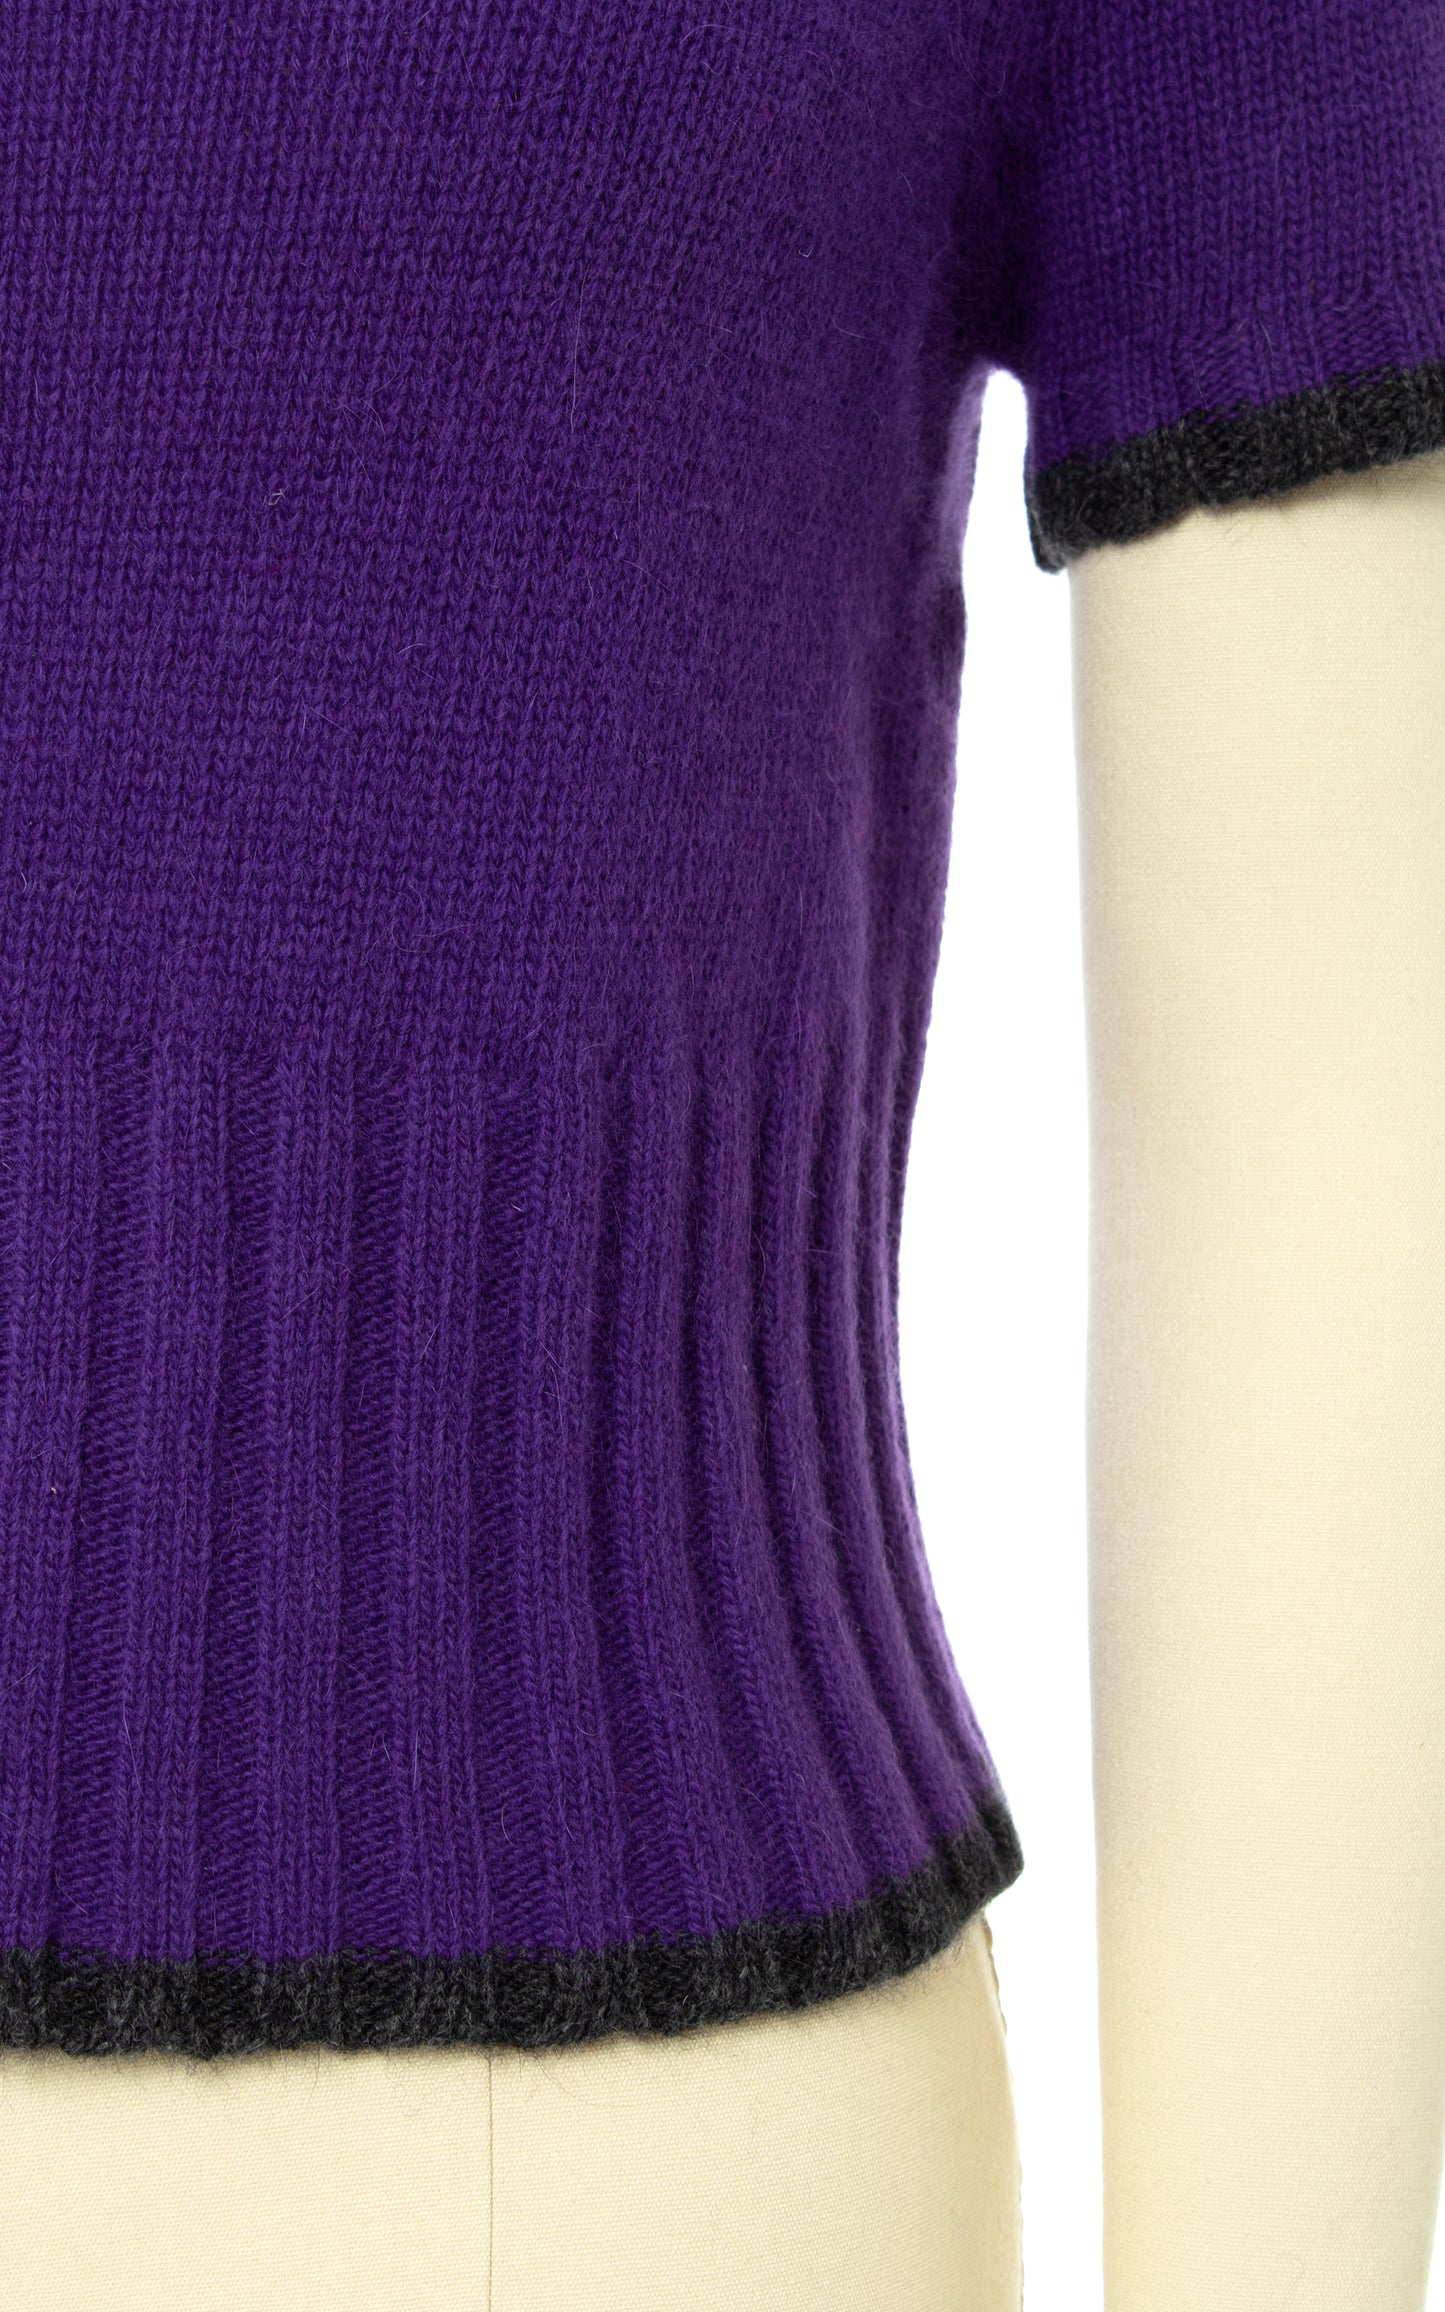 Vintage 1990s 90s DEADSTOCK Purple Knit Wool Angora Sweater Top | x-small/small | Birthday Life Vintage